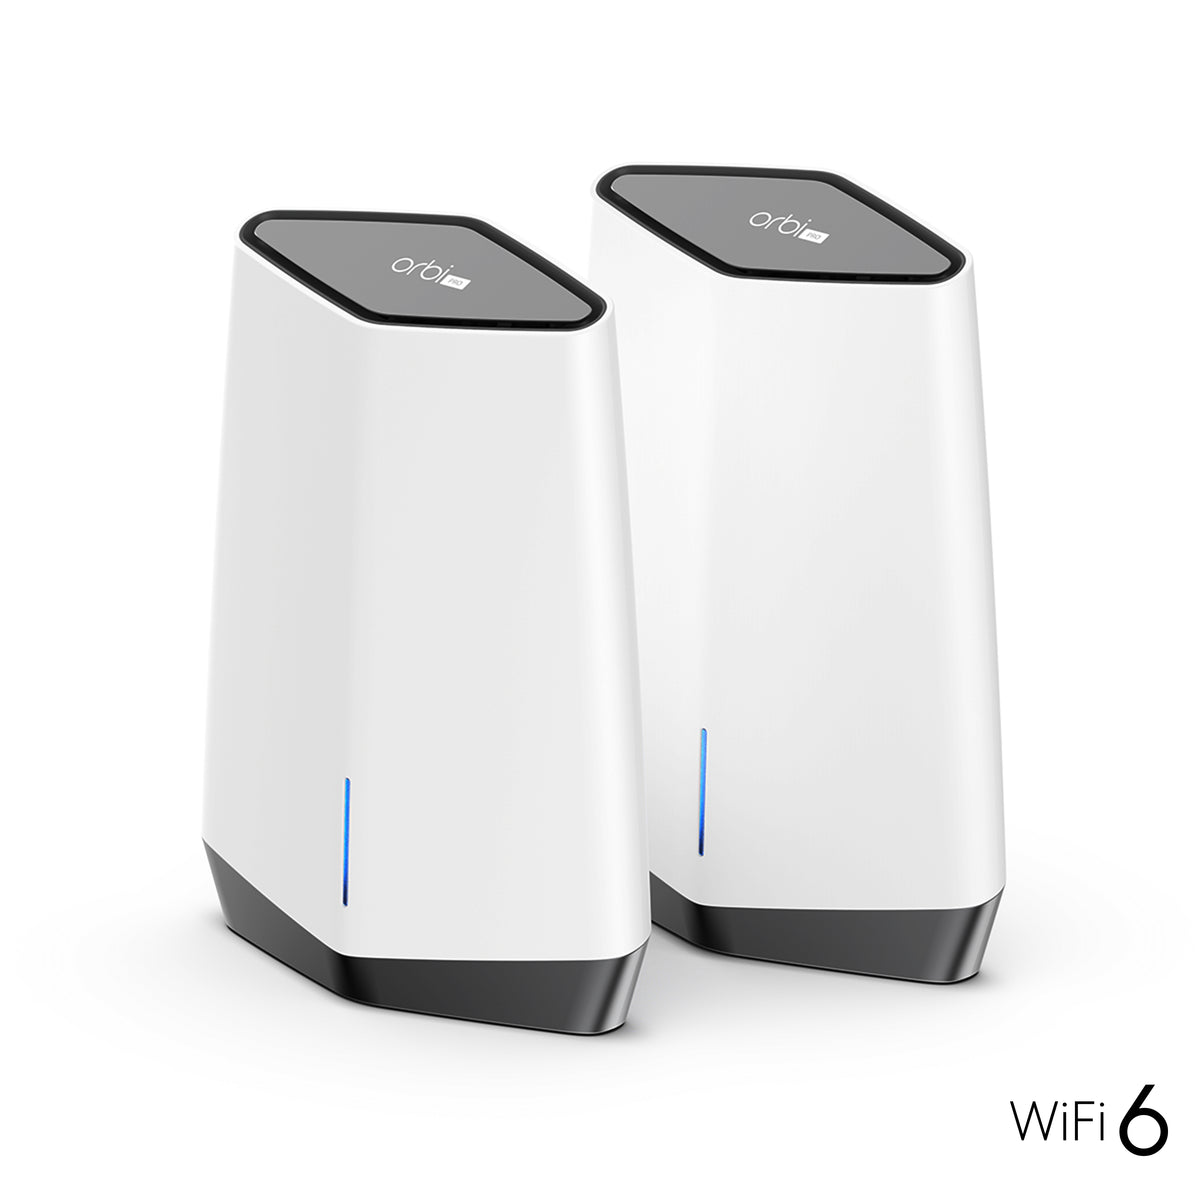 NETGEAR Orbi Pro SXK80 - Wi-Fi system (router, extender) - network - GigE, 2.5 GigE - 802.11a/b/g/n/ac/ax - Tri-Band - wall mountable, ceiling mountable